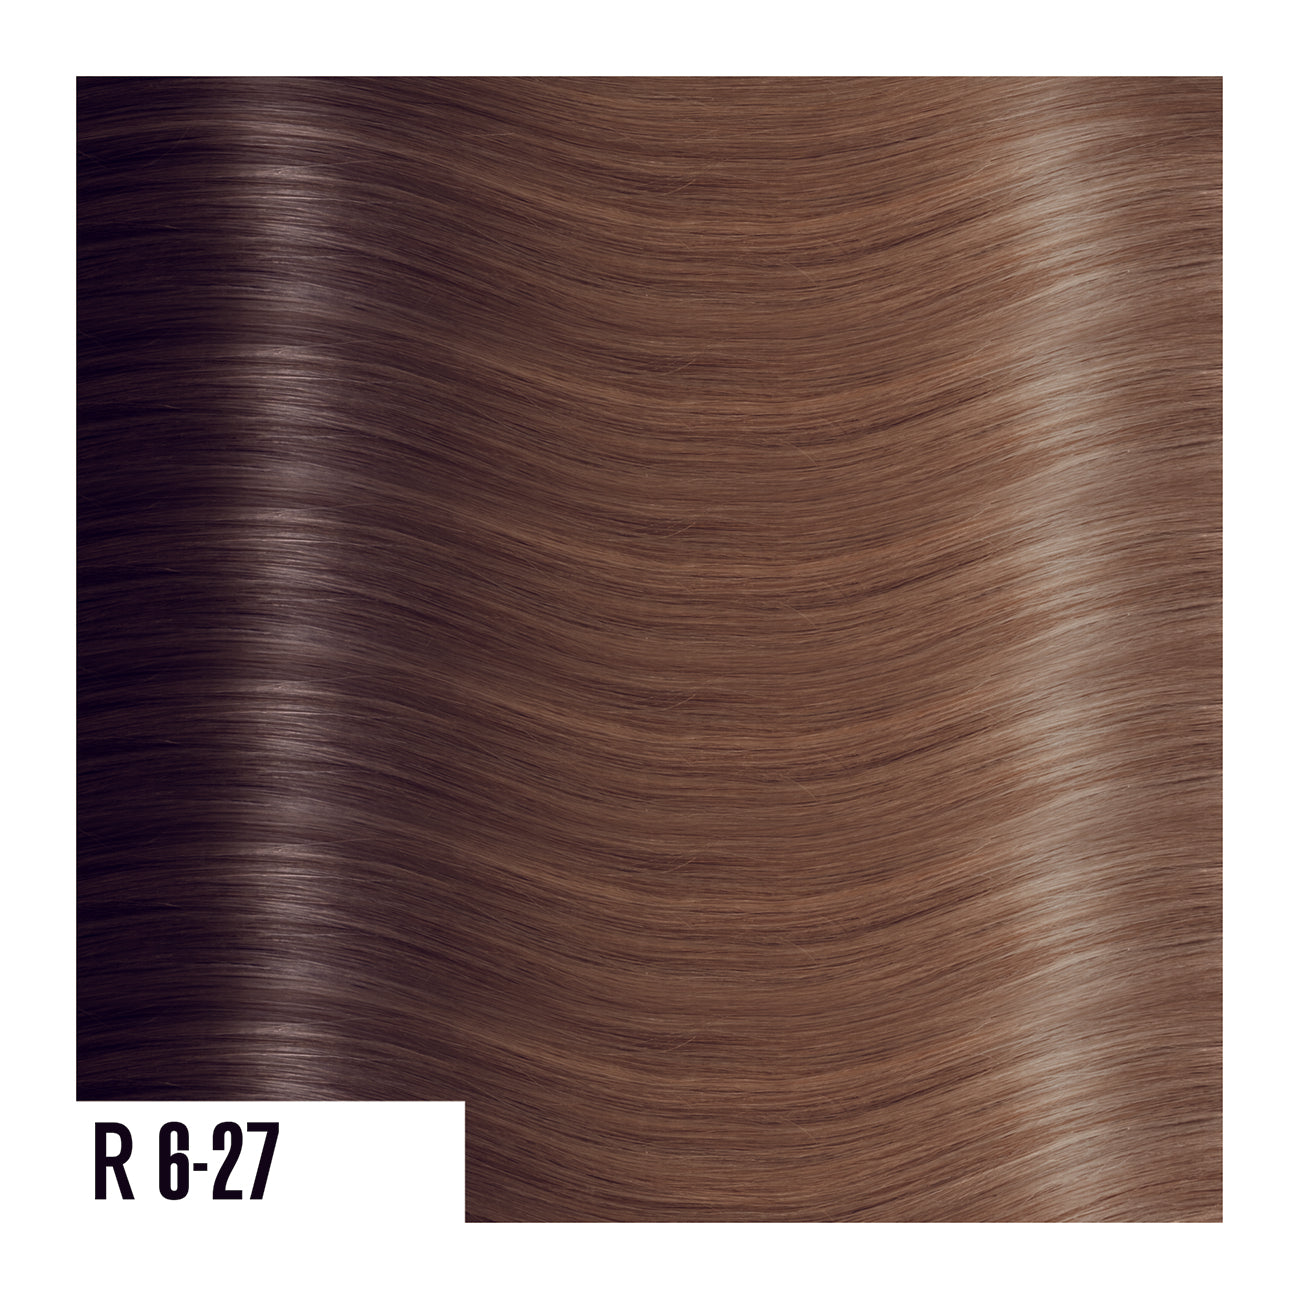 R6-27 - Rooted Prime Tape In Medium Brown Fade Into Light Brown - Ombre colors are a beautiful gradual blend of 3 colors with darker roots and lighter ends. 